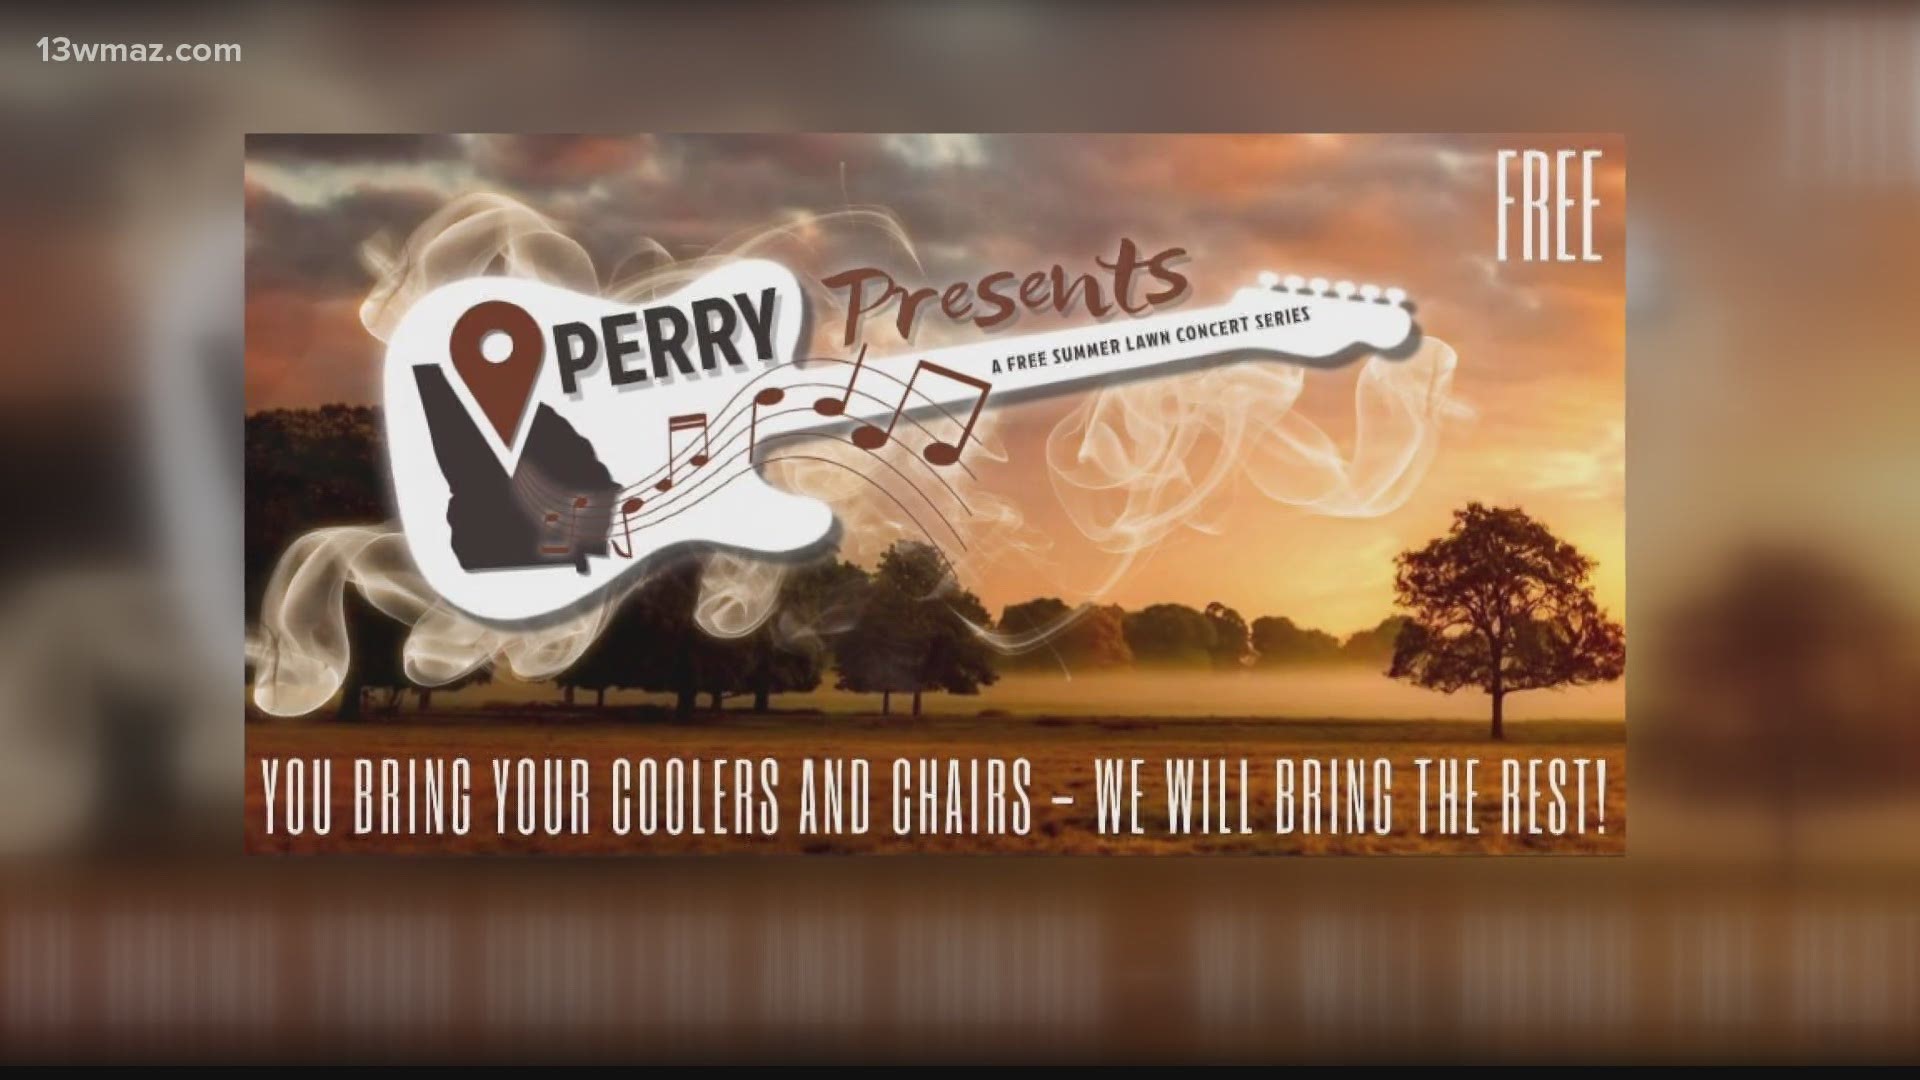 The City of Perry wants to help folks get a fun start for their weekend. They're hosting a summer lawn concert series Friday at Heritage Oaks Park.